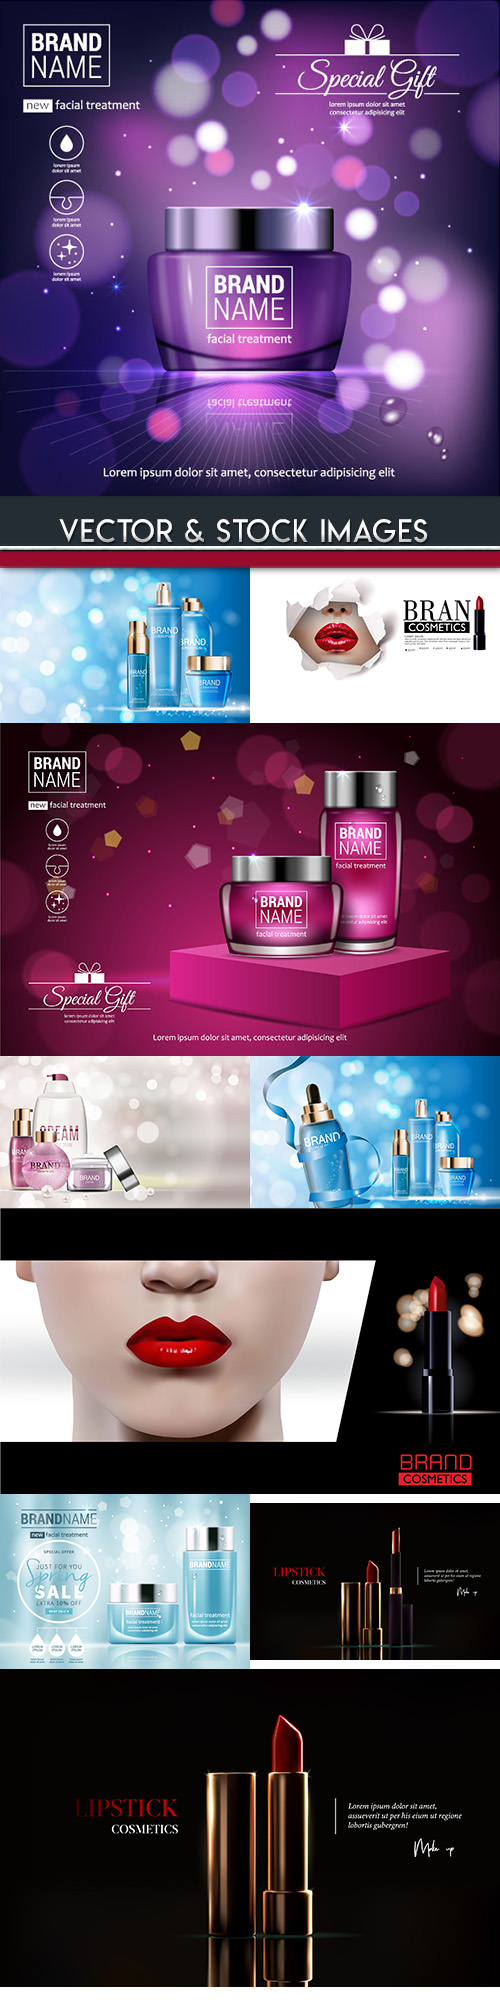 Brand name cosmetics plastic and glass bottles 3d illustration